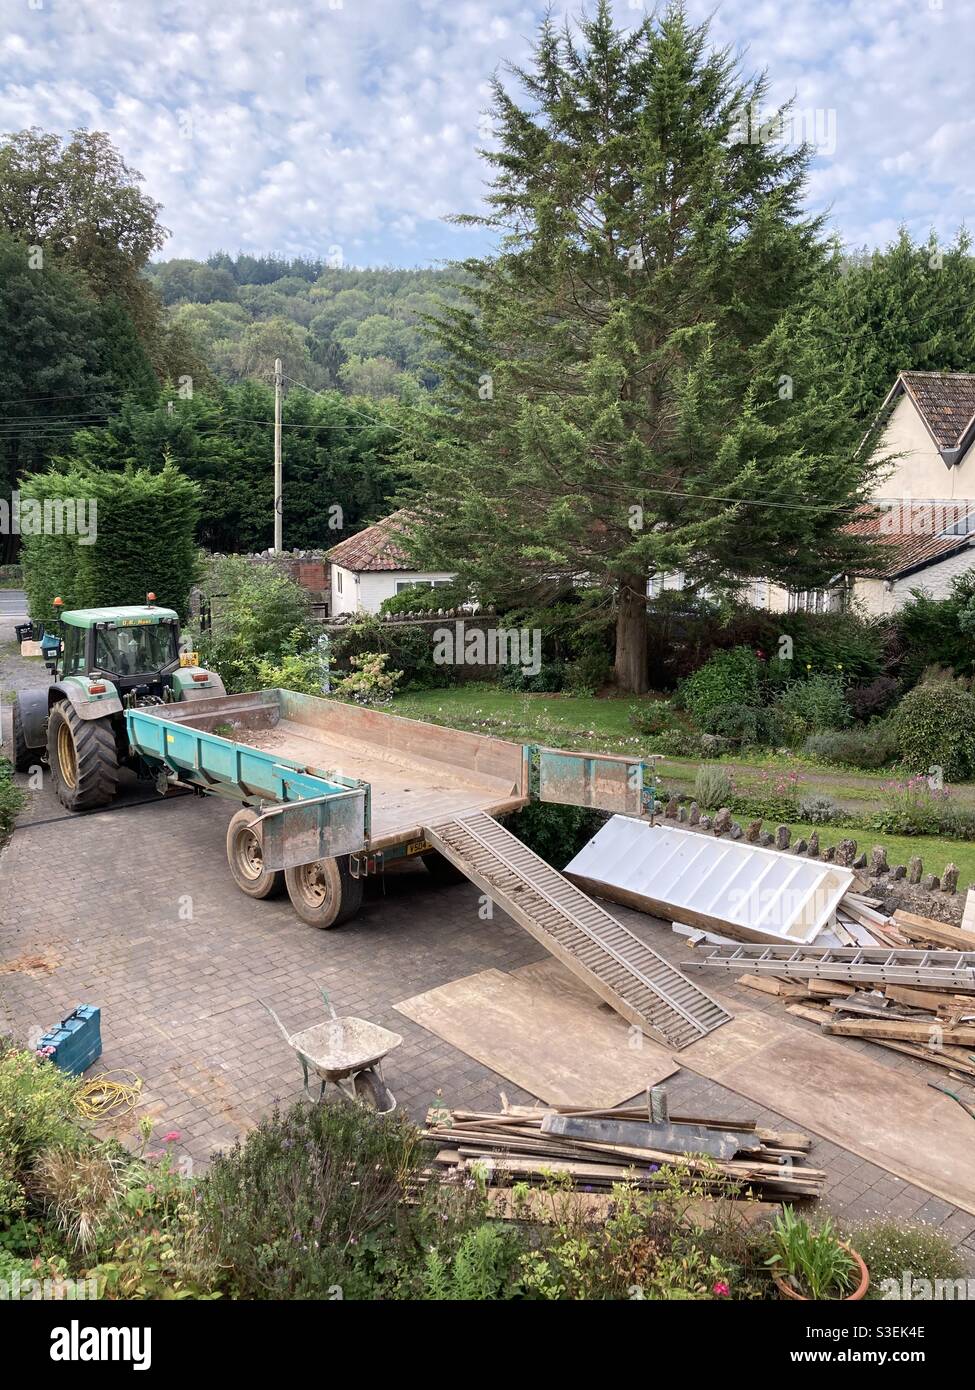 Building renovation with a tractor and trailer on the drive loading waste rubble and building materials from groundwork. Stock Photo